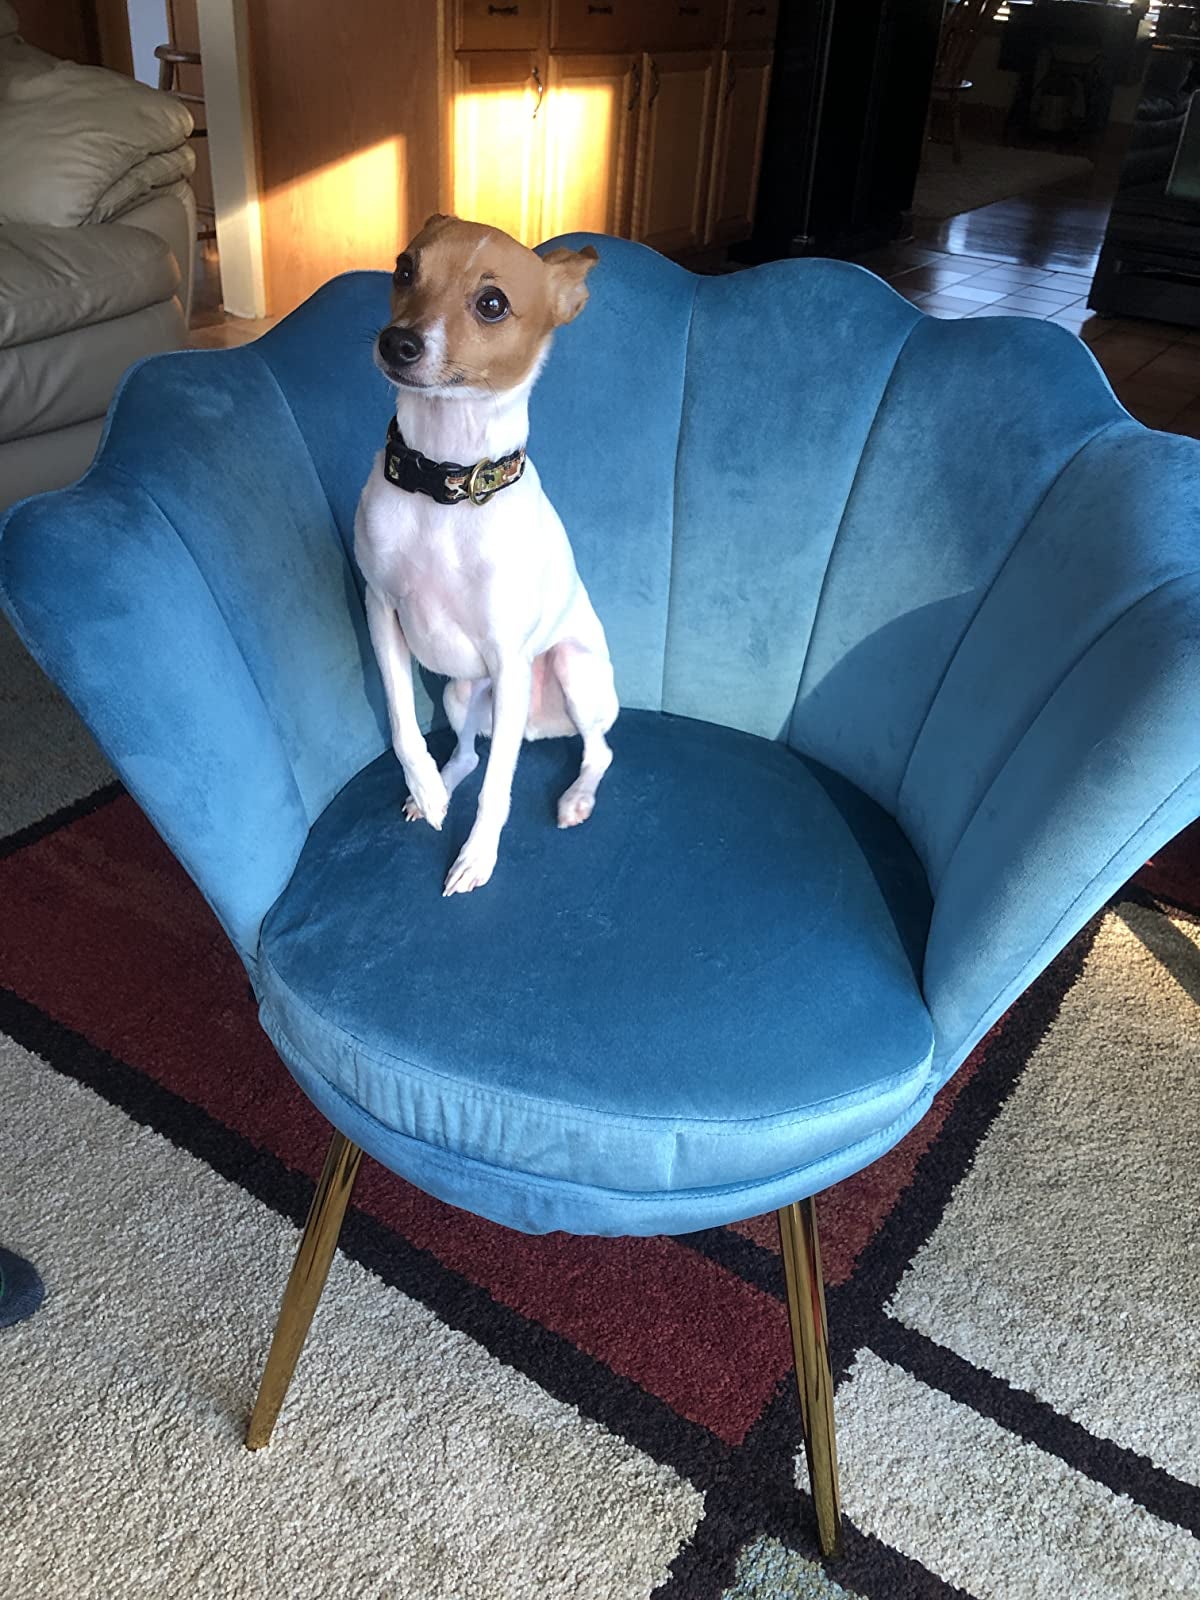 Reviewer image of dog on top of bright blue chair with rounded edges and gold legs on a square-patterned rug